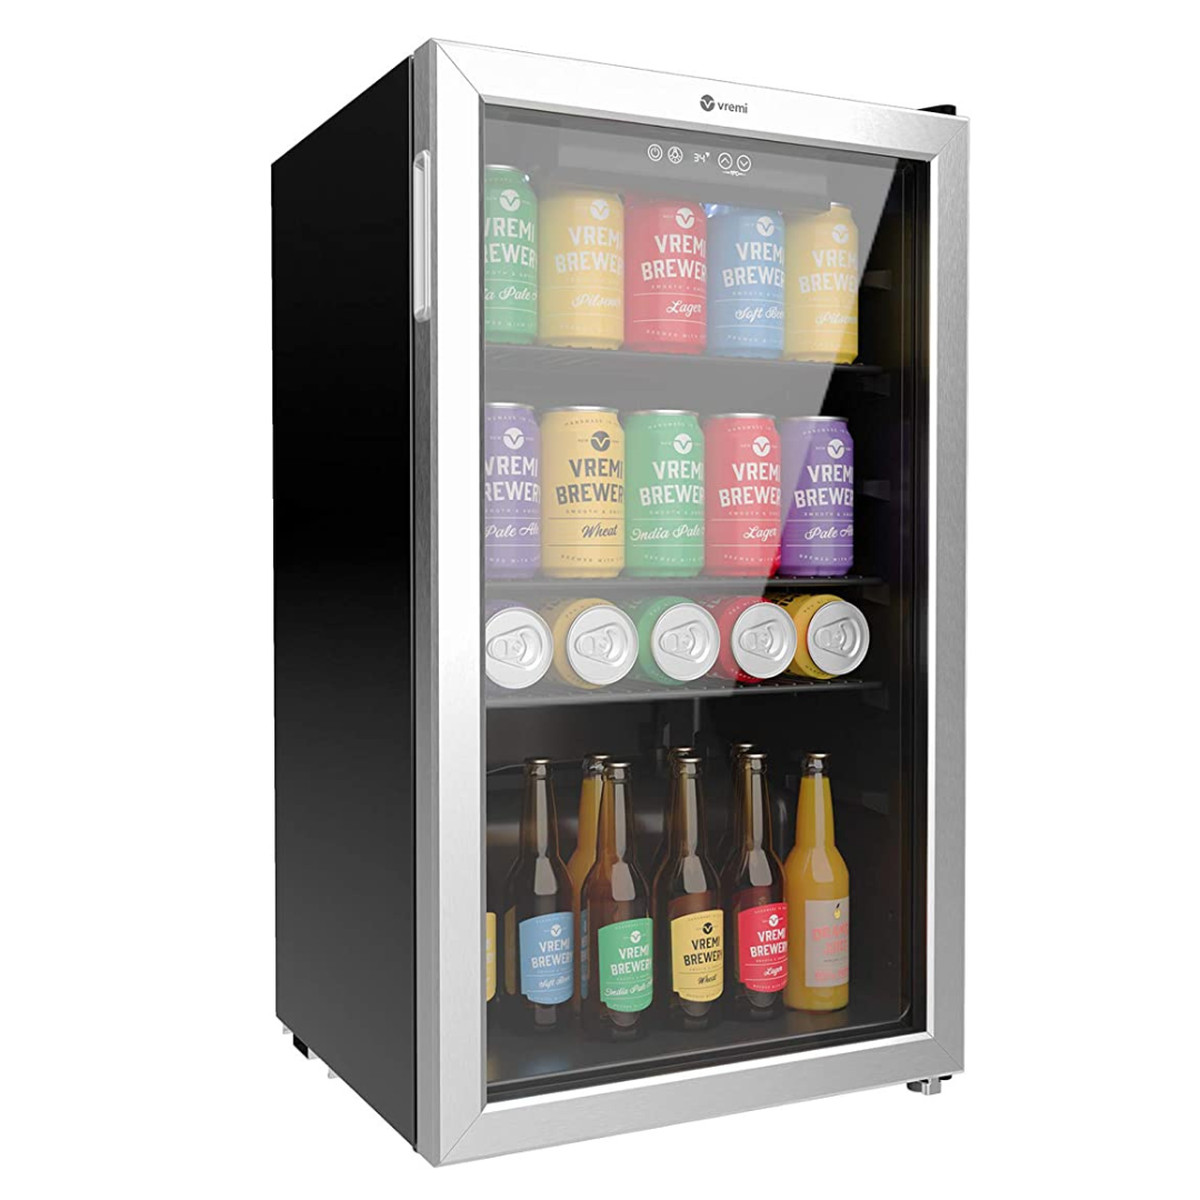 Vremi beverage refrigerator and cooler full of drinks and snacks.